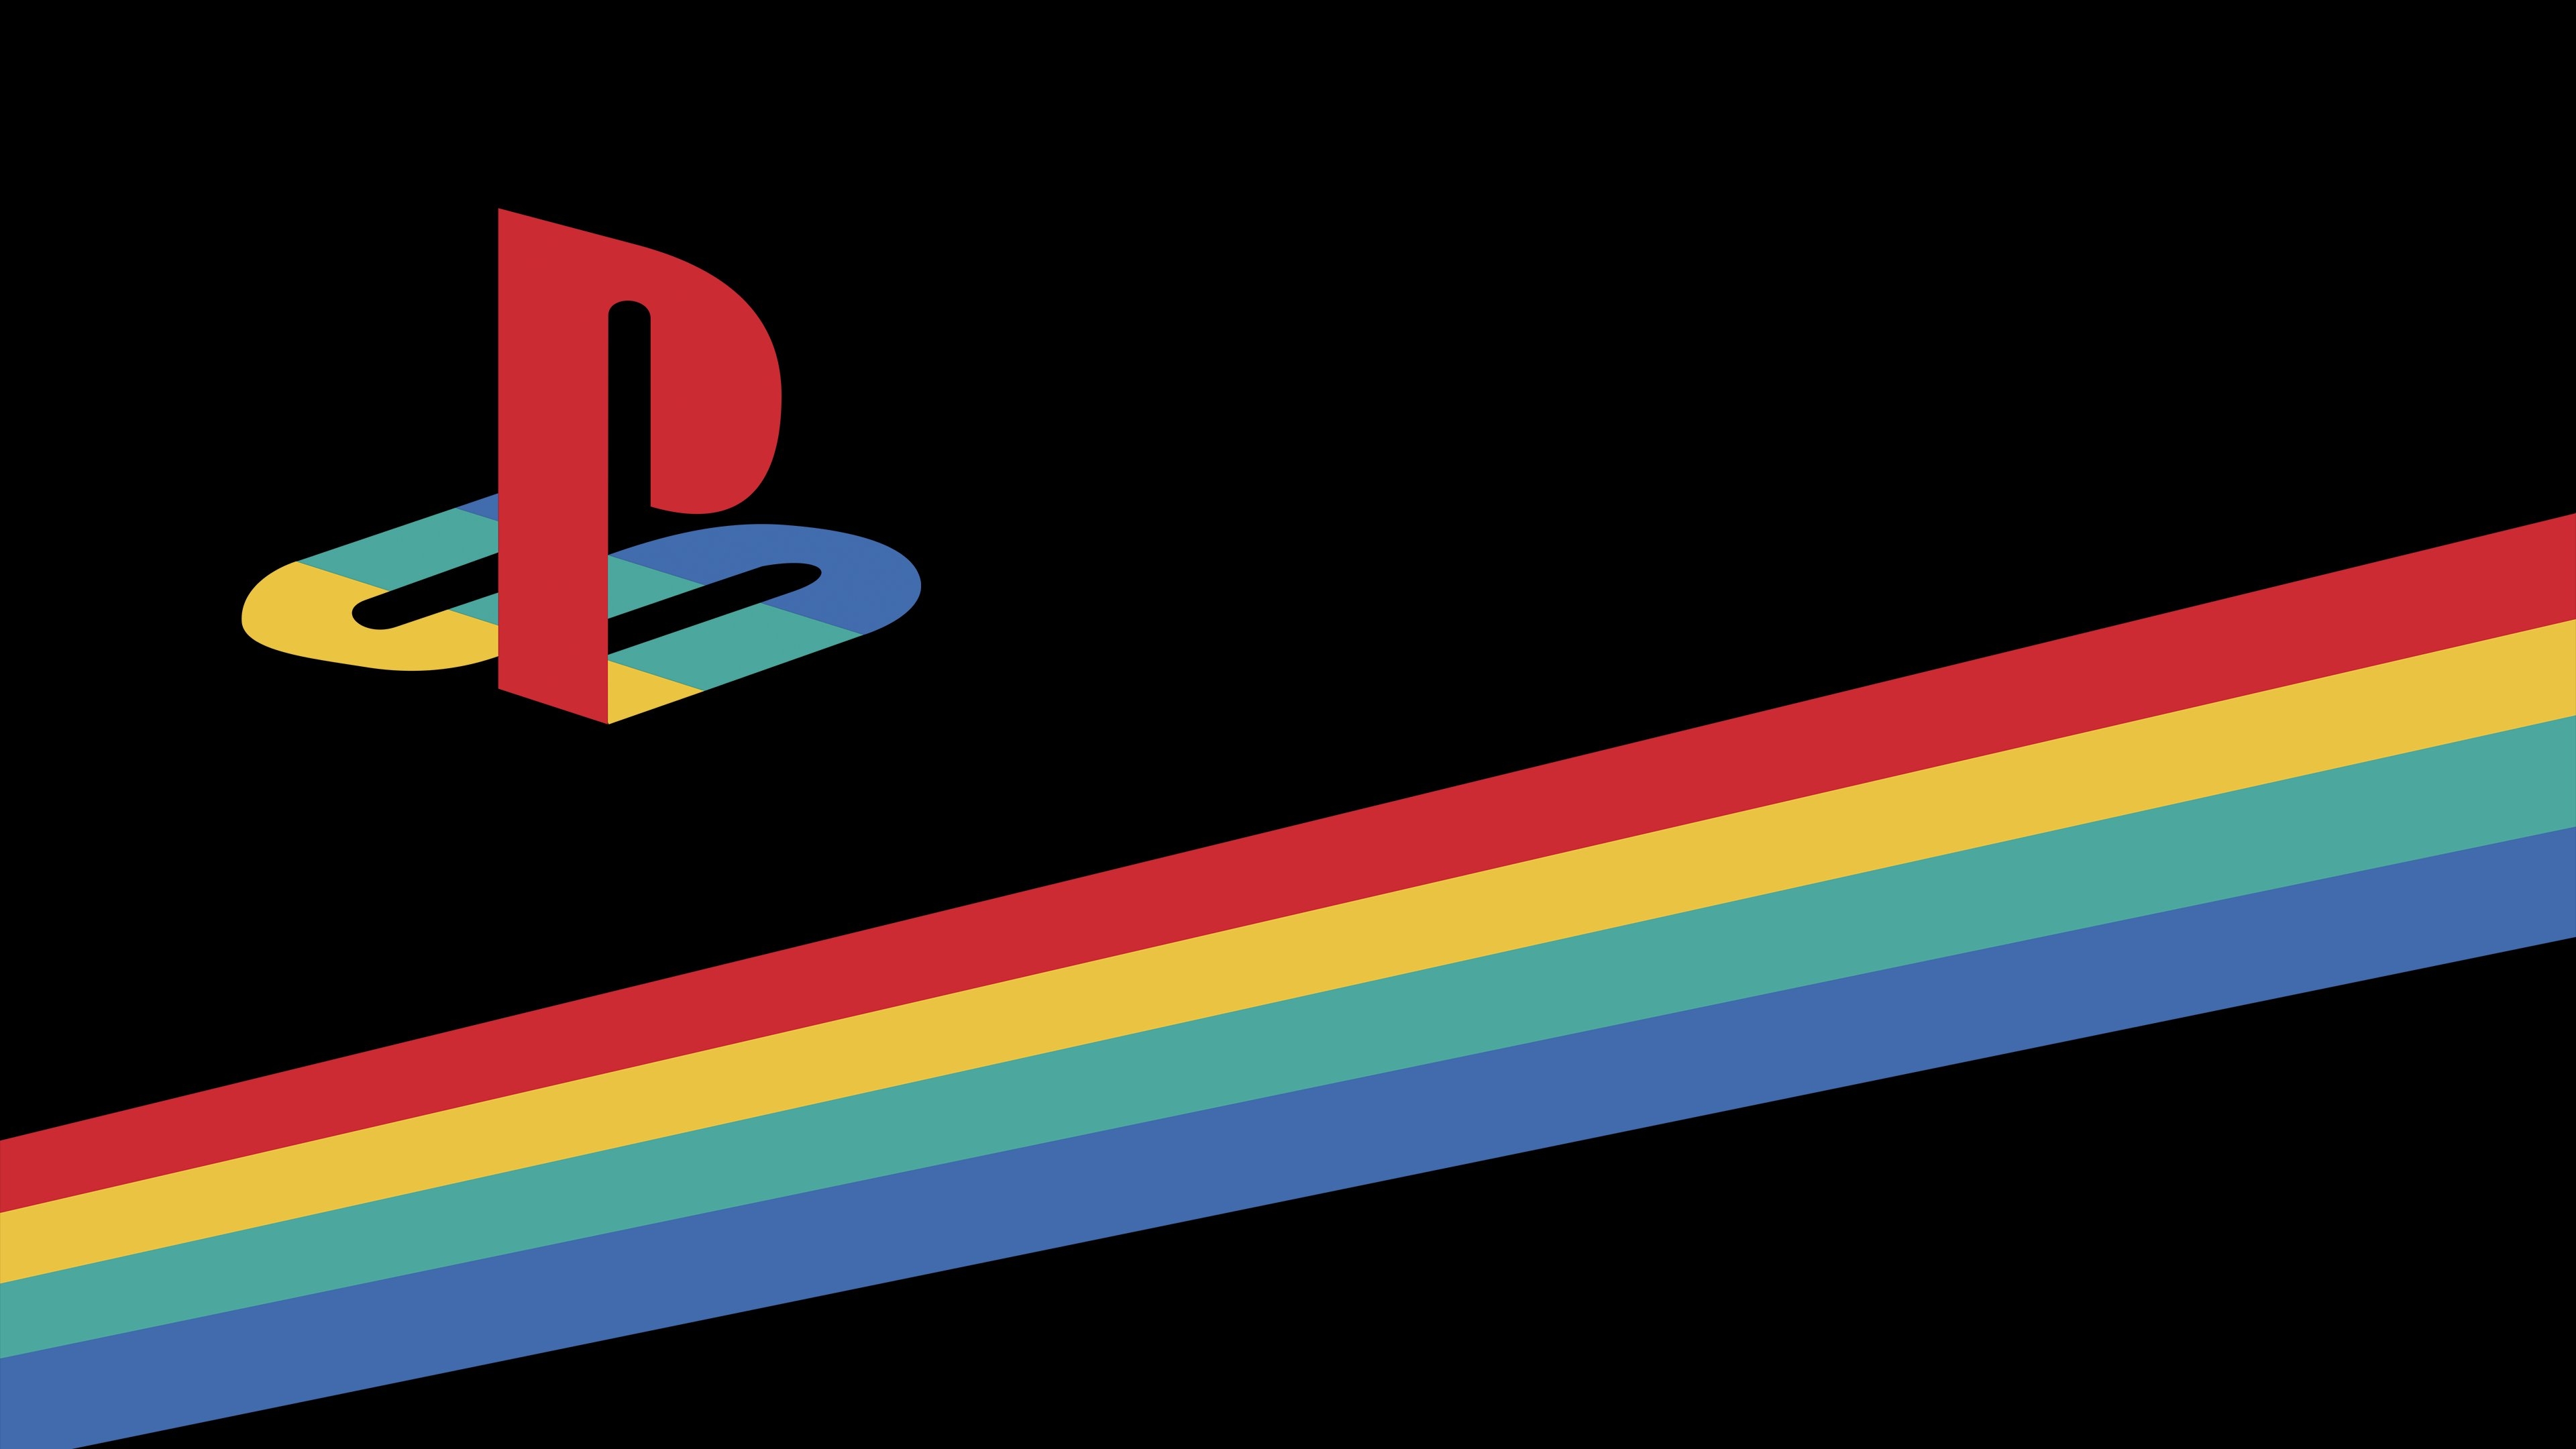 Retro Playstation Wallpapers Wallpapers